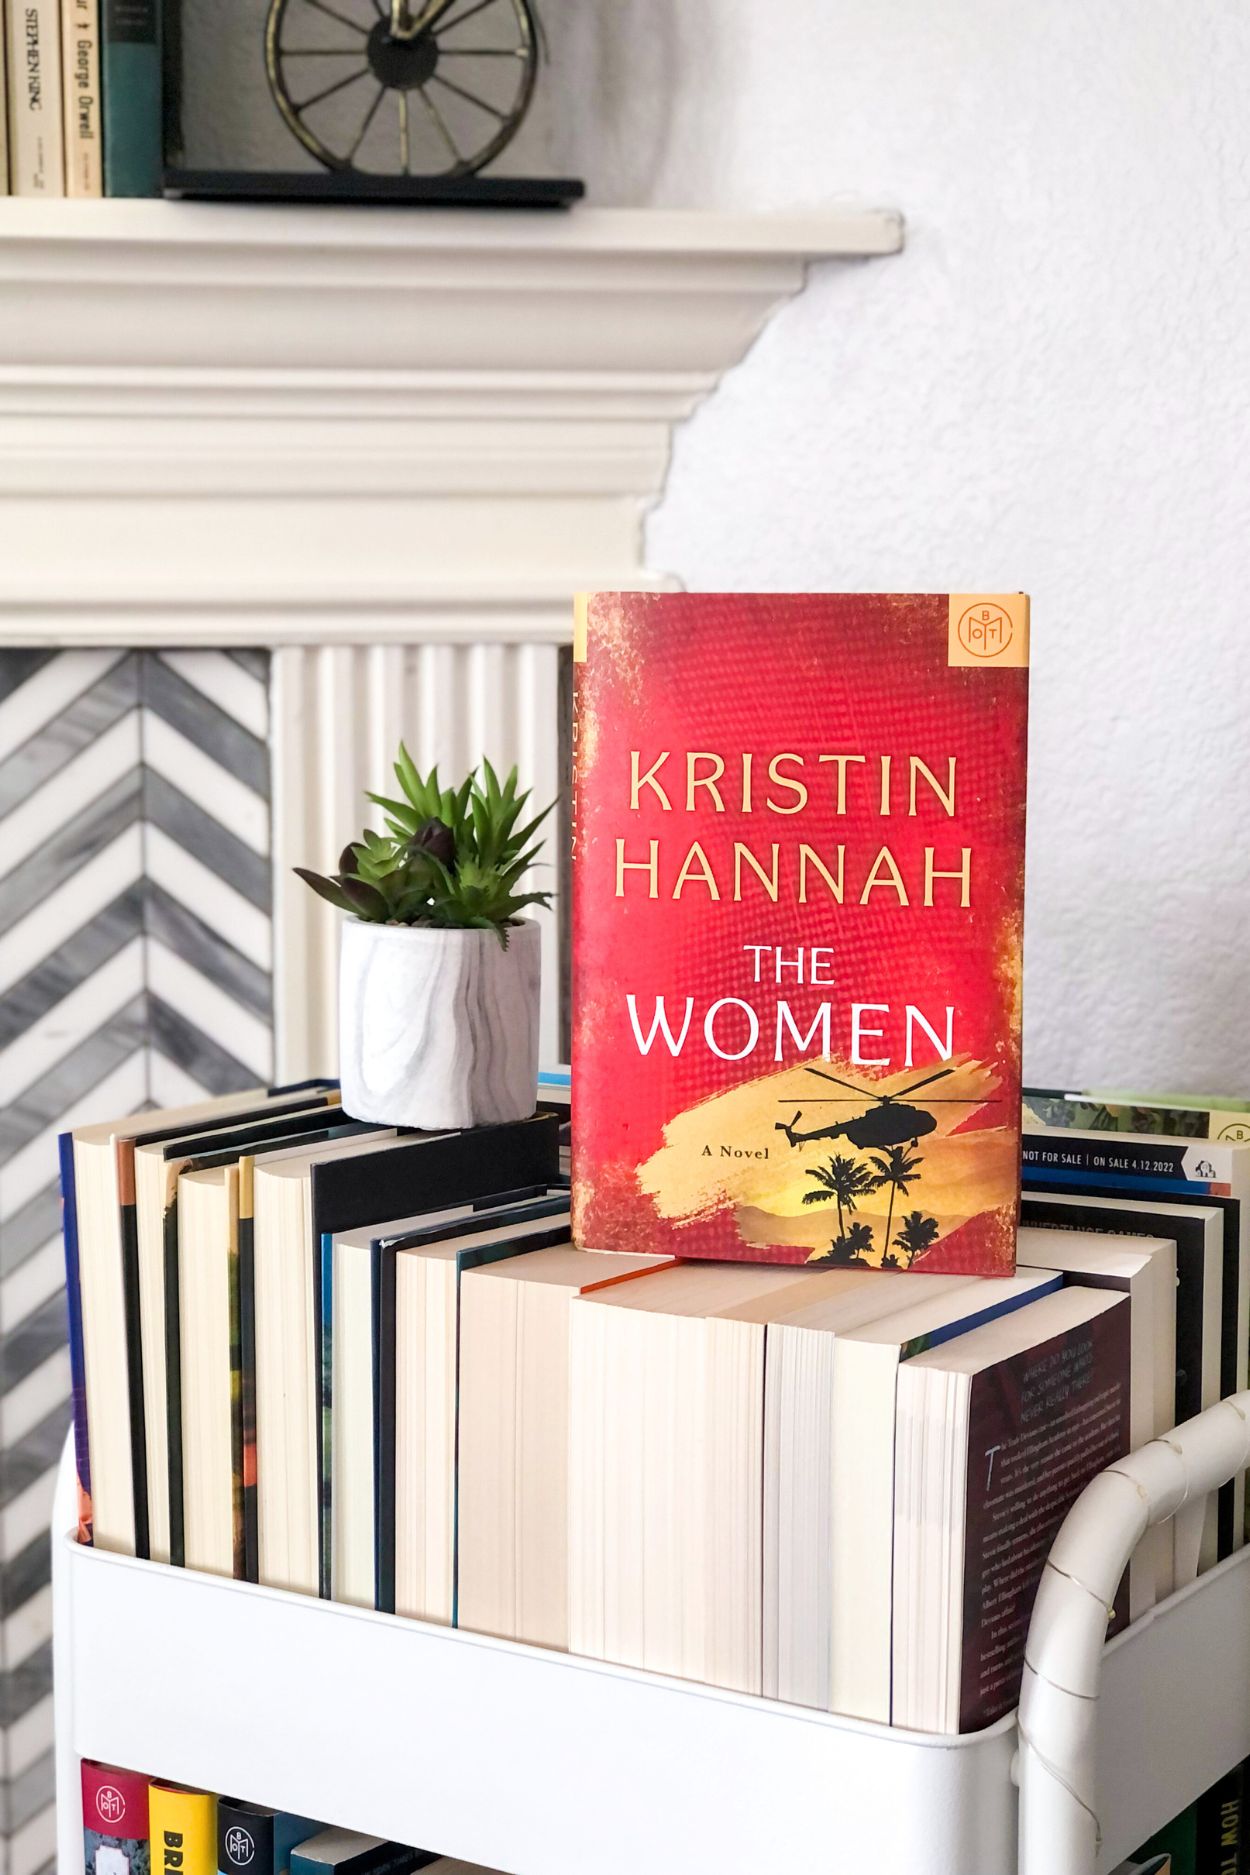 The Women by Kristin Hannah hardcover book sitting on a book cart on top of a pile of paperback books